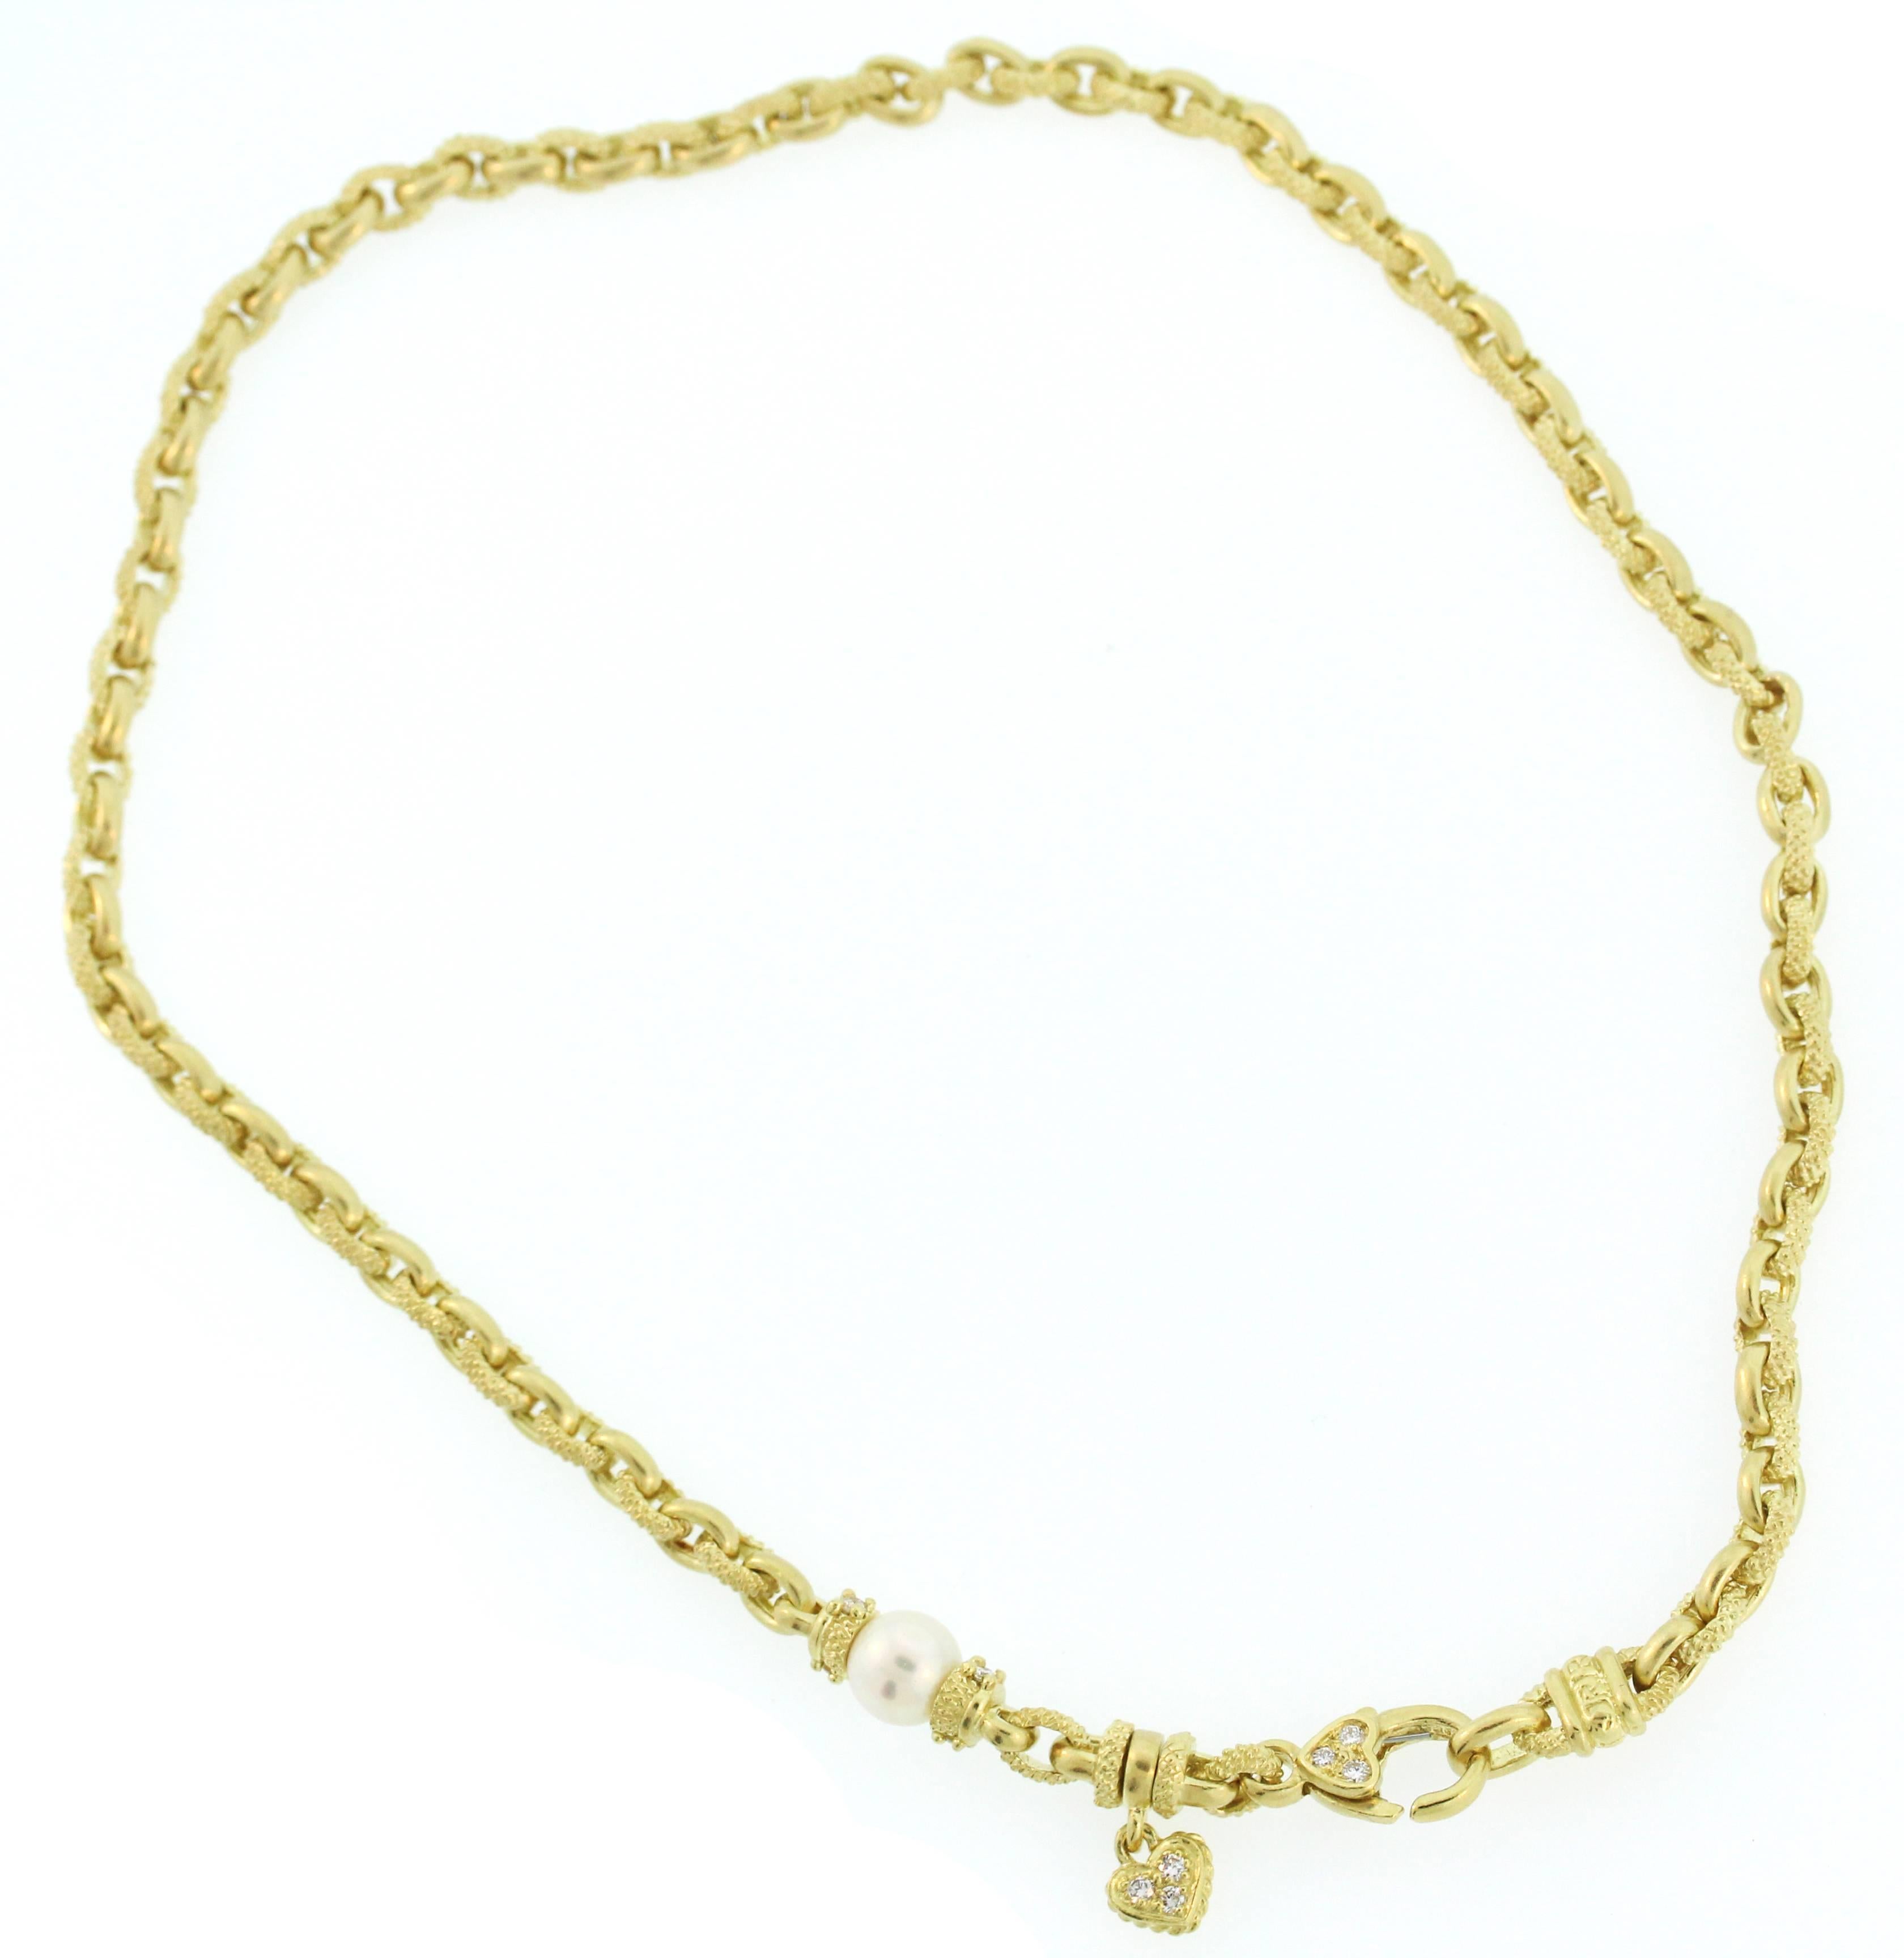 Women's Judith Ripka Chain Necklace with Diamond and Gold Heart Enhancer